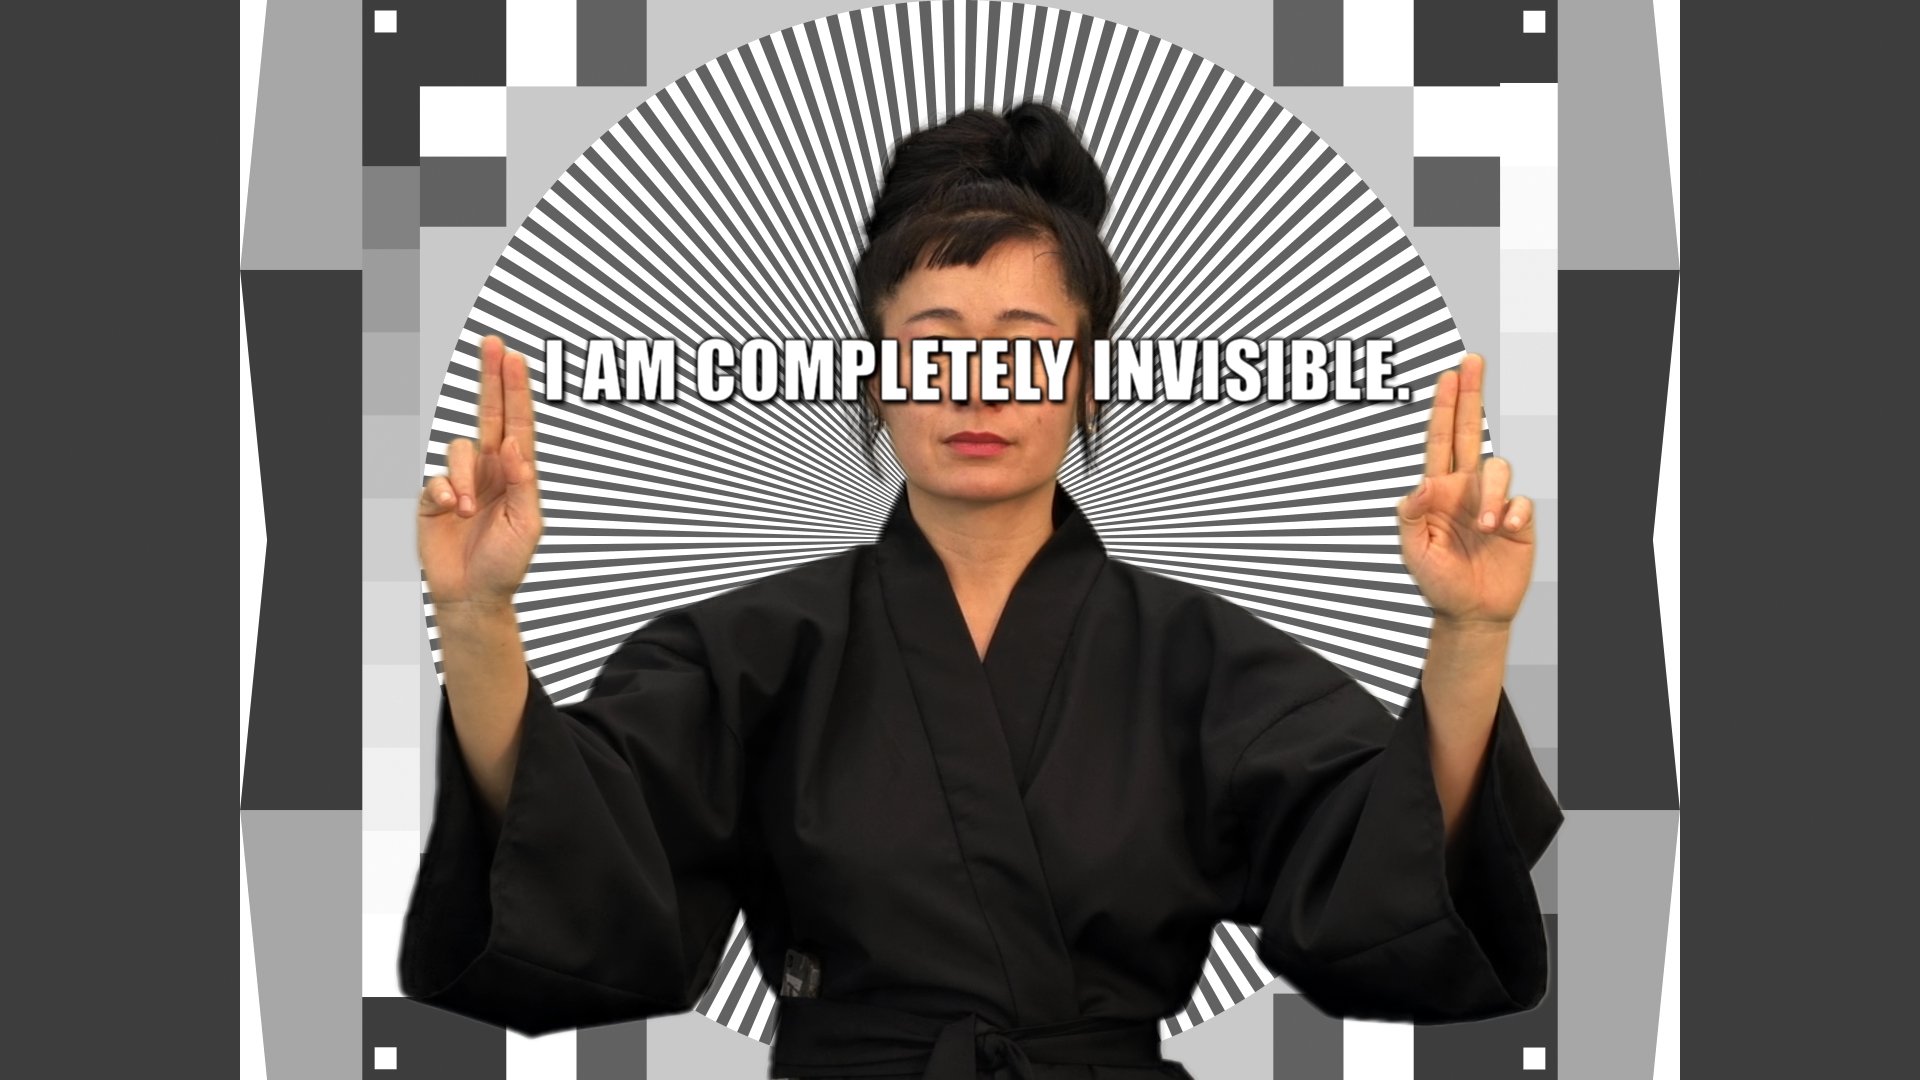 Hito Steyerl, How Not To Be Seen. A Fucking Didactic Educational.MOV File, 2013, Video still Courtesy Hito Steyerl